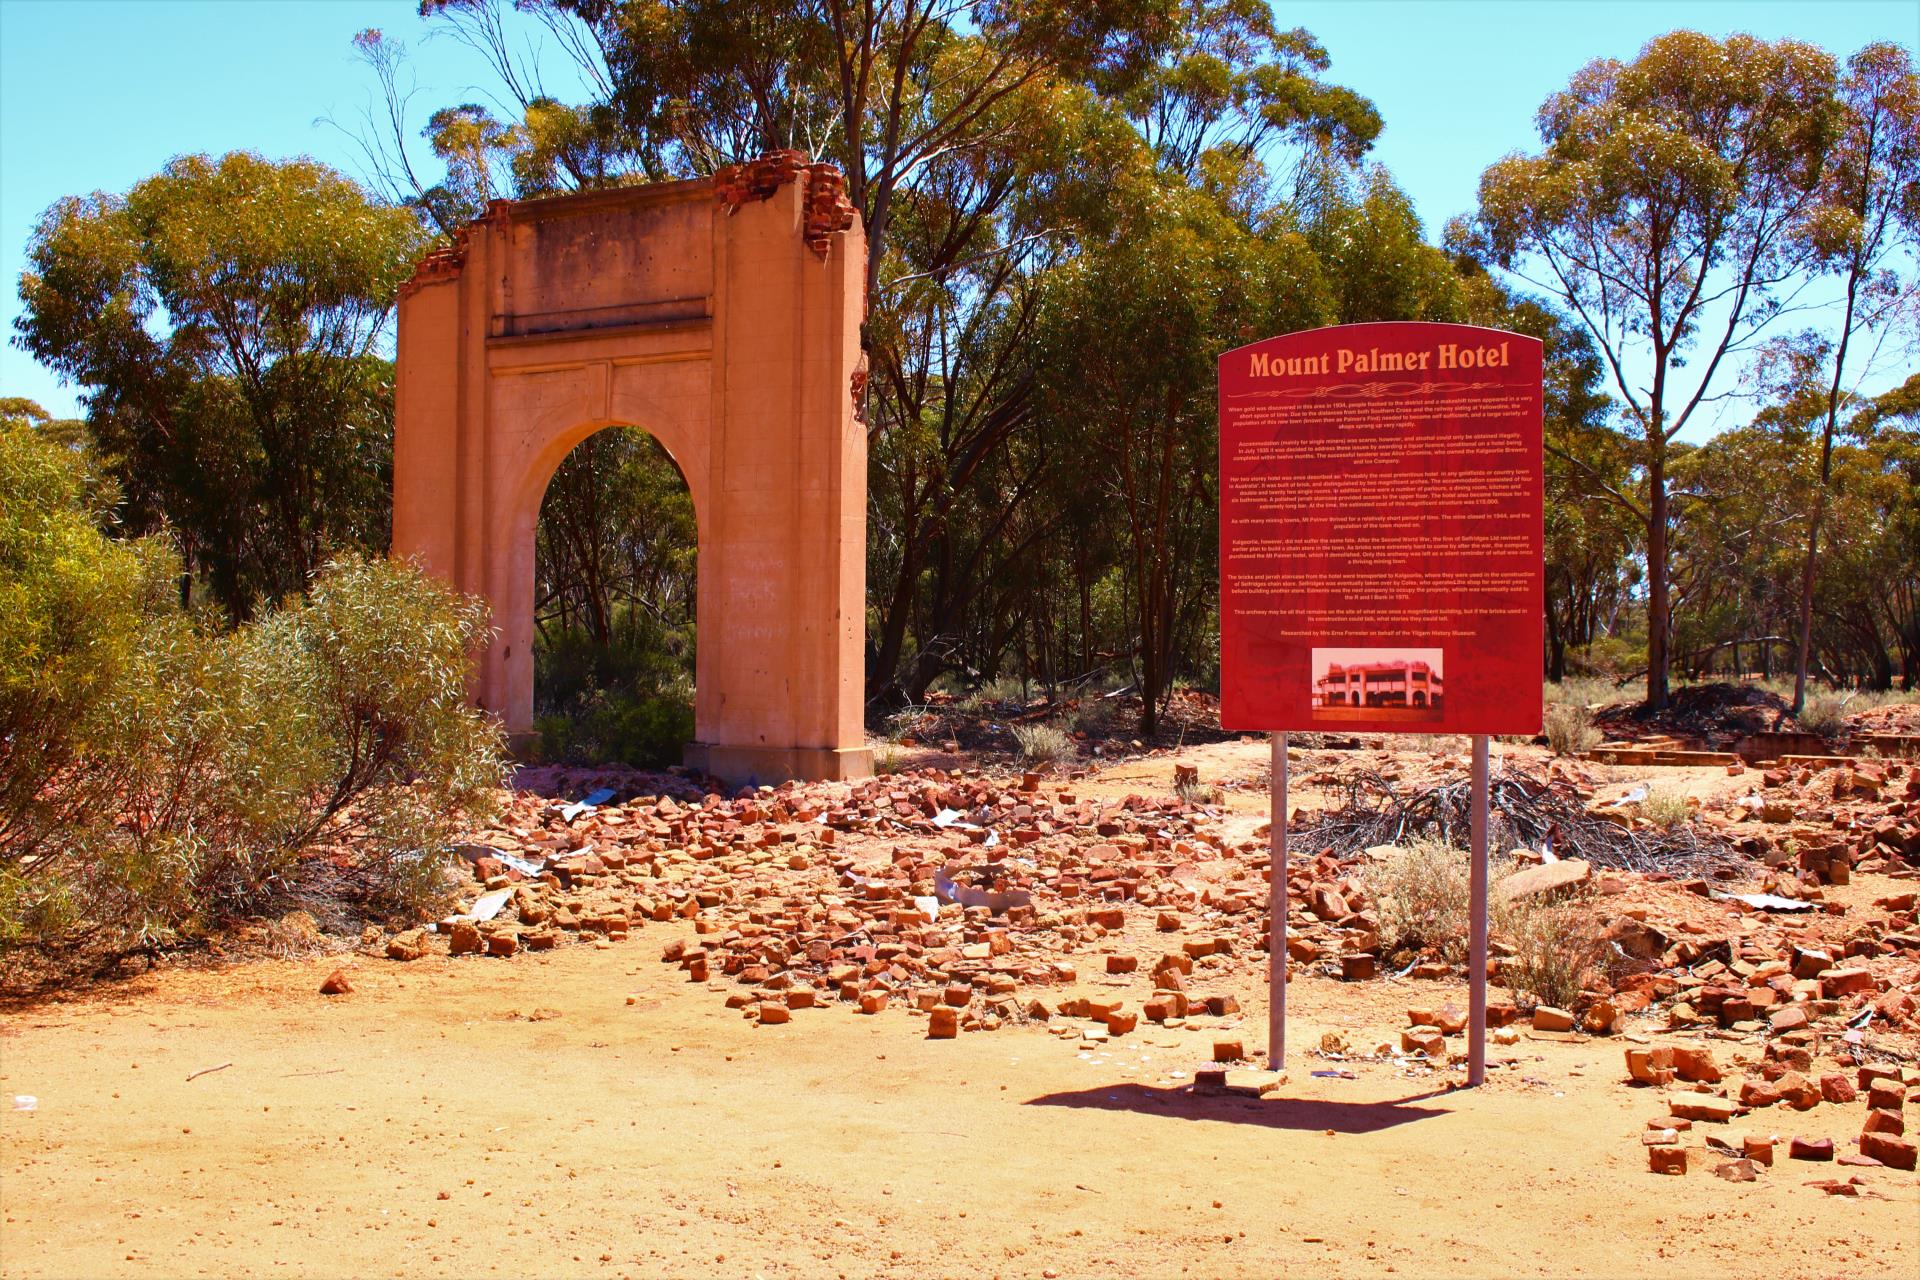 Mount Palmer arch and sign [photo by Tanika Treloar]